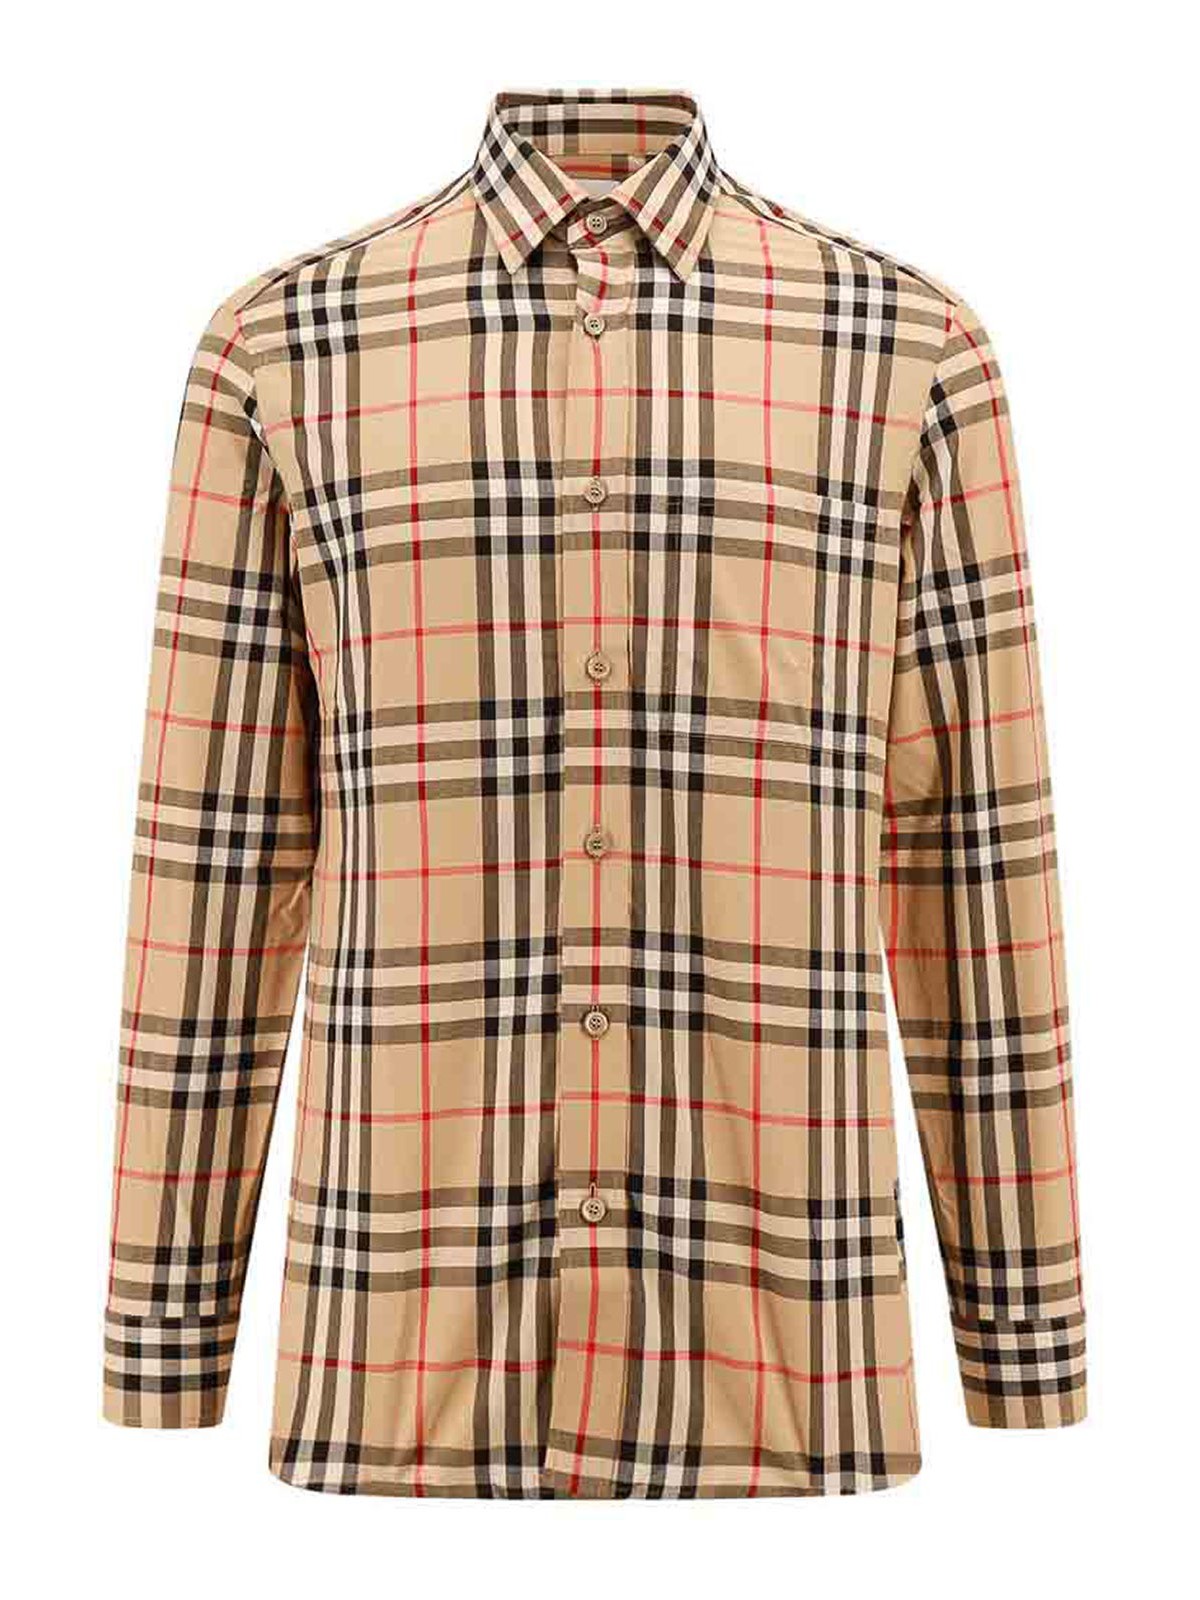 Burberry Cotton Shirt With Check Motif In Beige